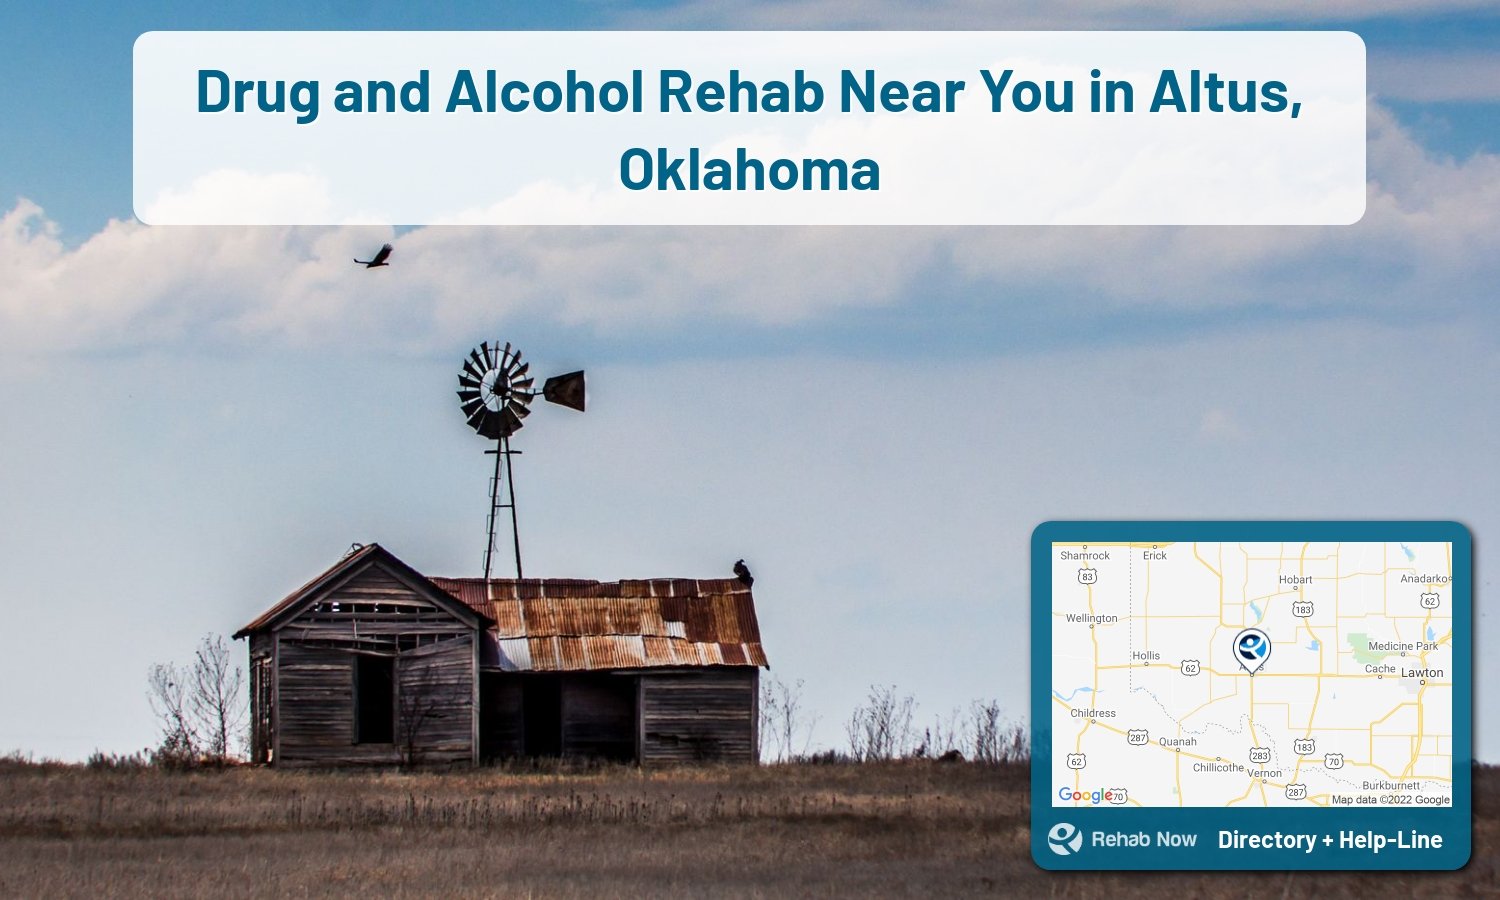 List of alcohol and drug treatment centers near you in Altus, Oklahoma. Research certifications, programs, methods, pricing, and more.